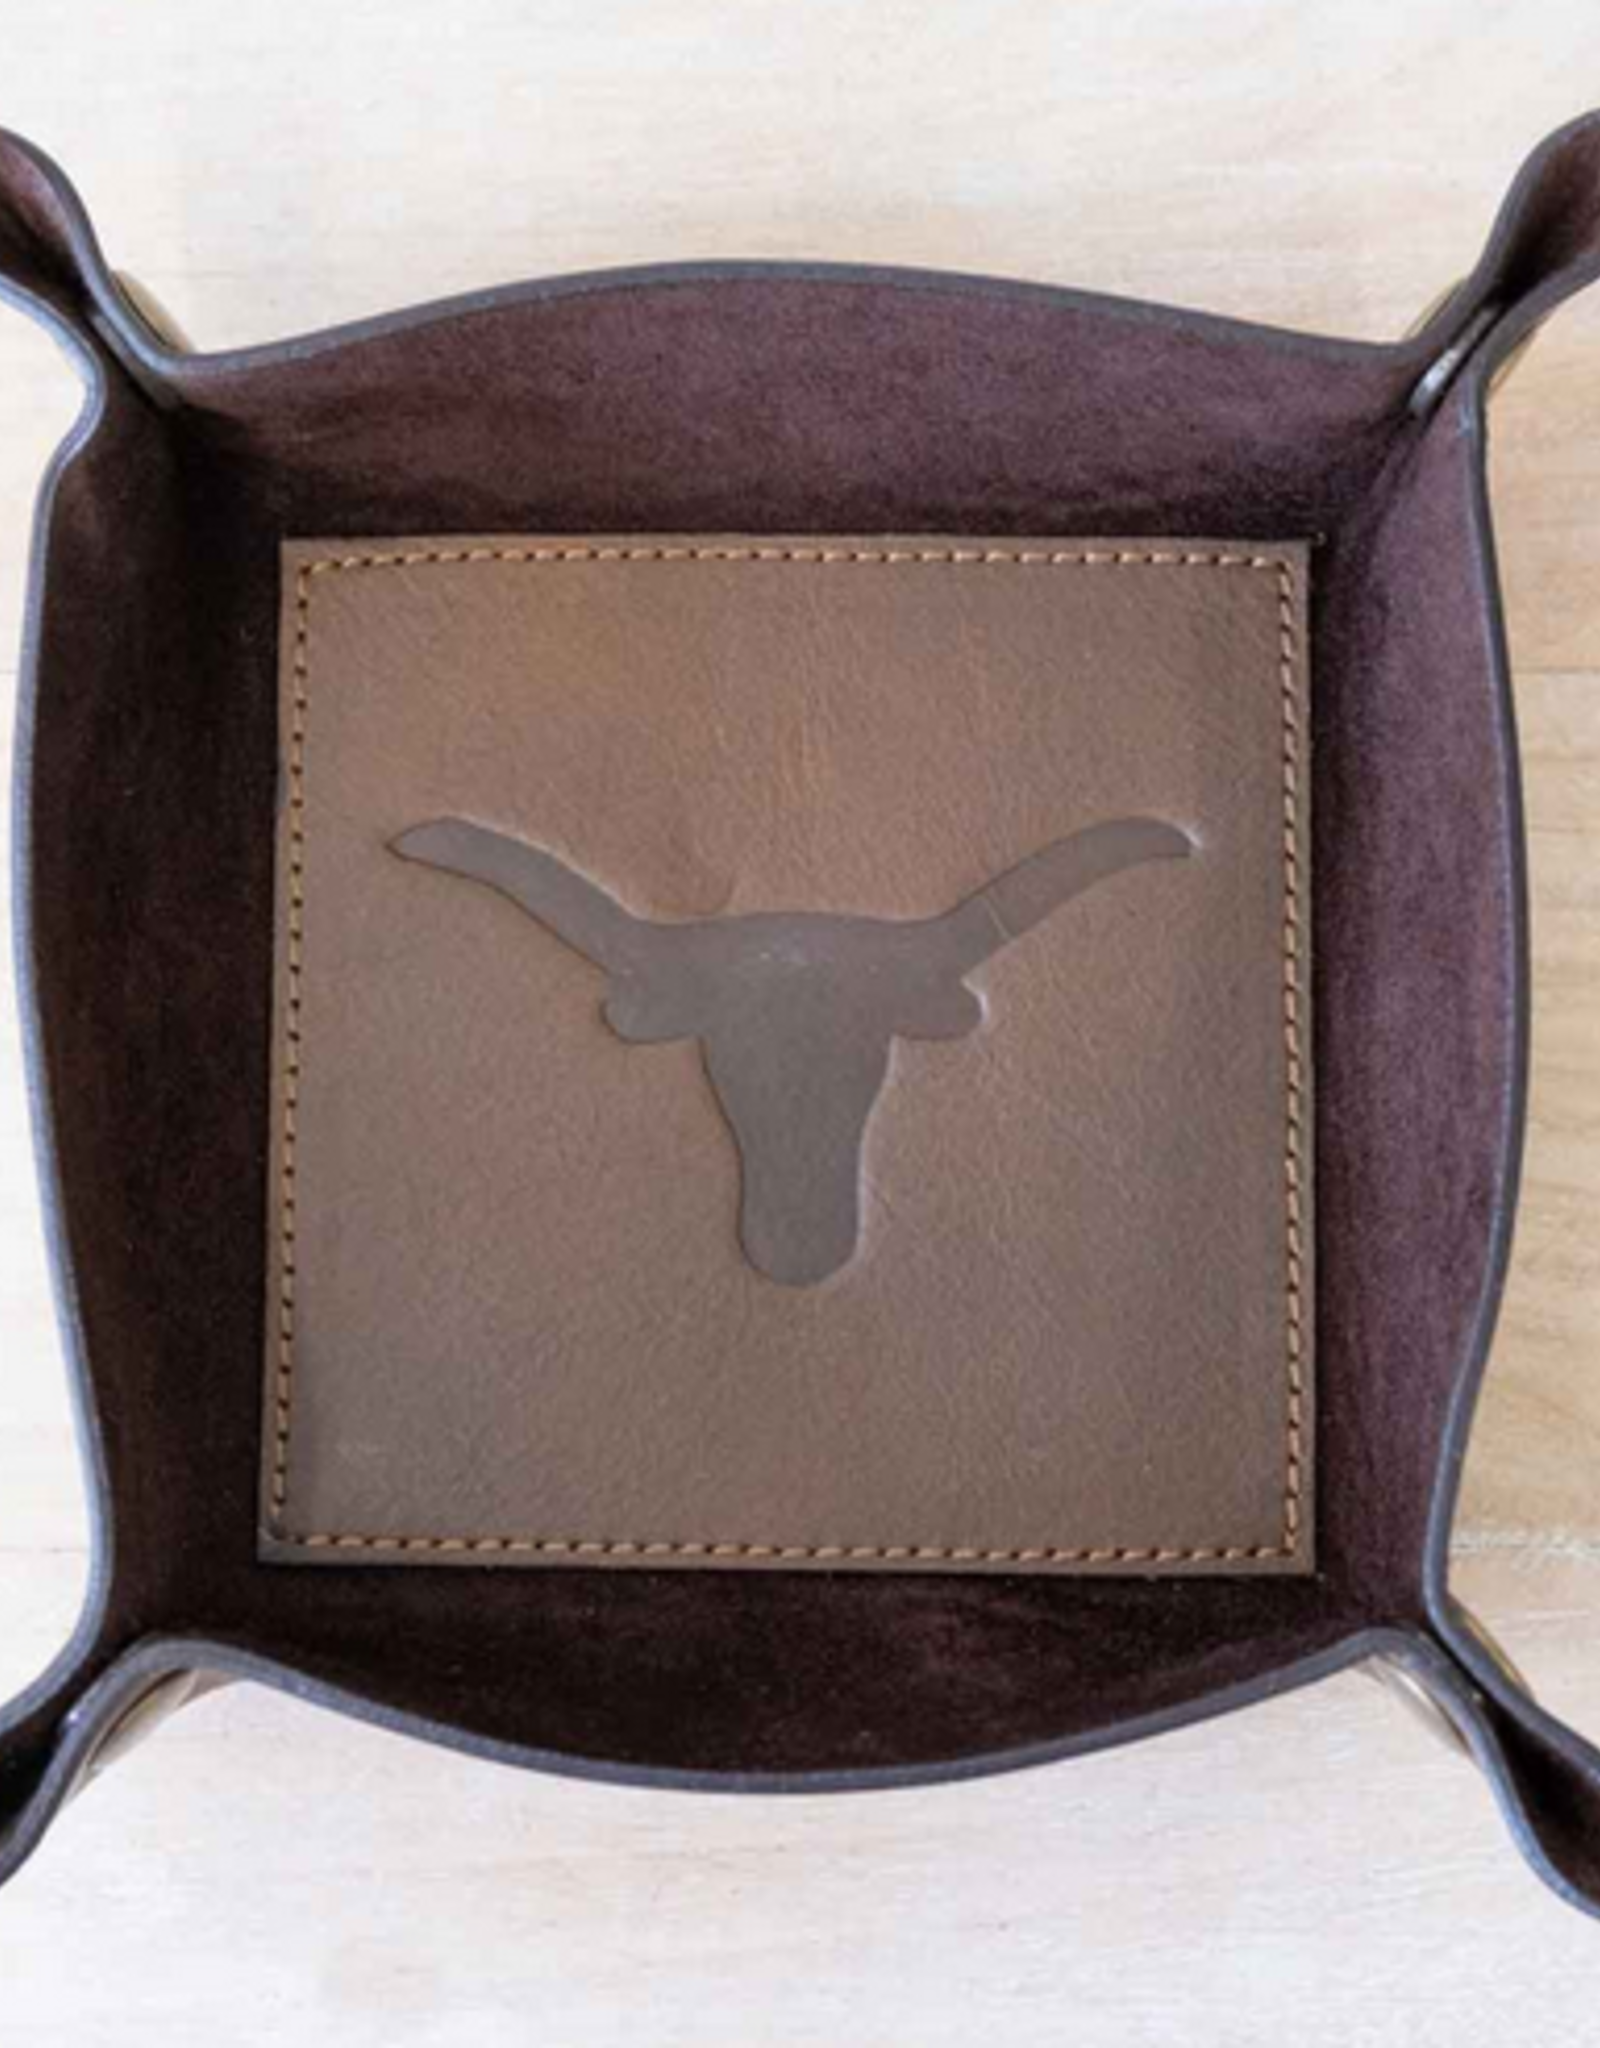 Wink Longhorn Leather Valet Tray